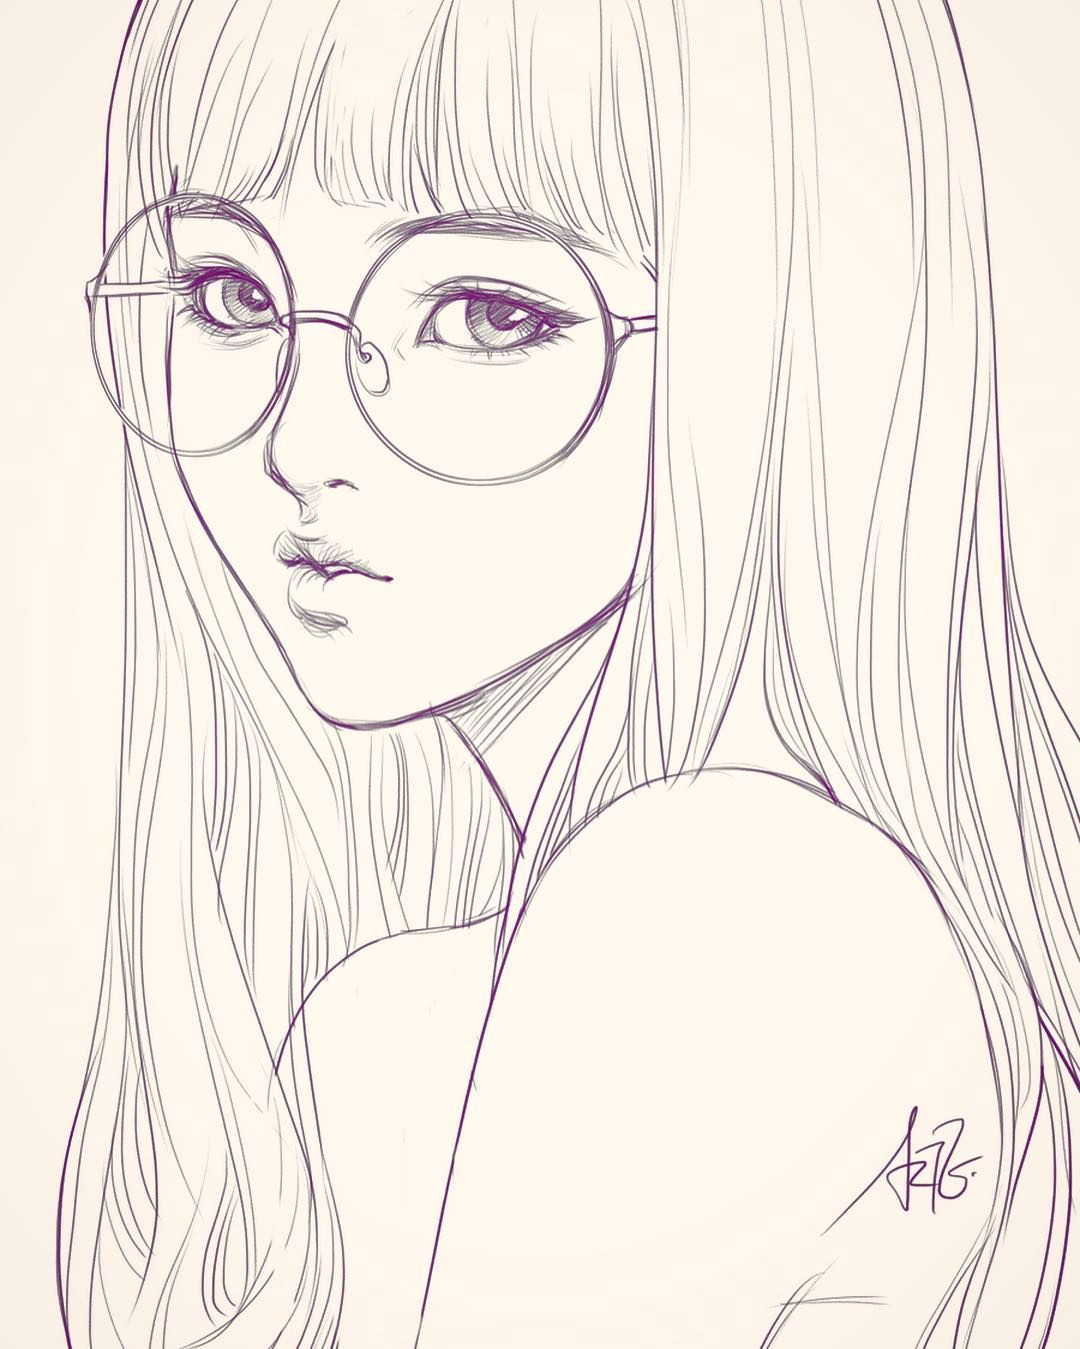 B W Girl Drawing Last Sketch Of Girl with Glasses Having Bad Backache It Hurts